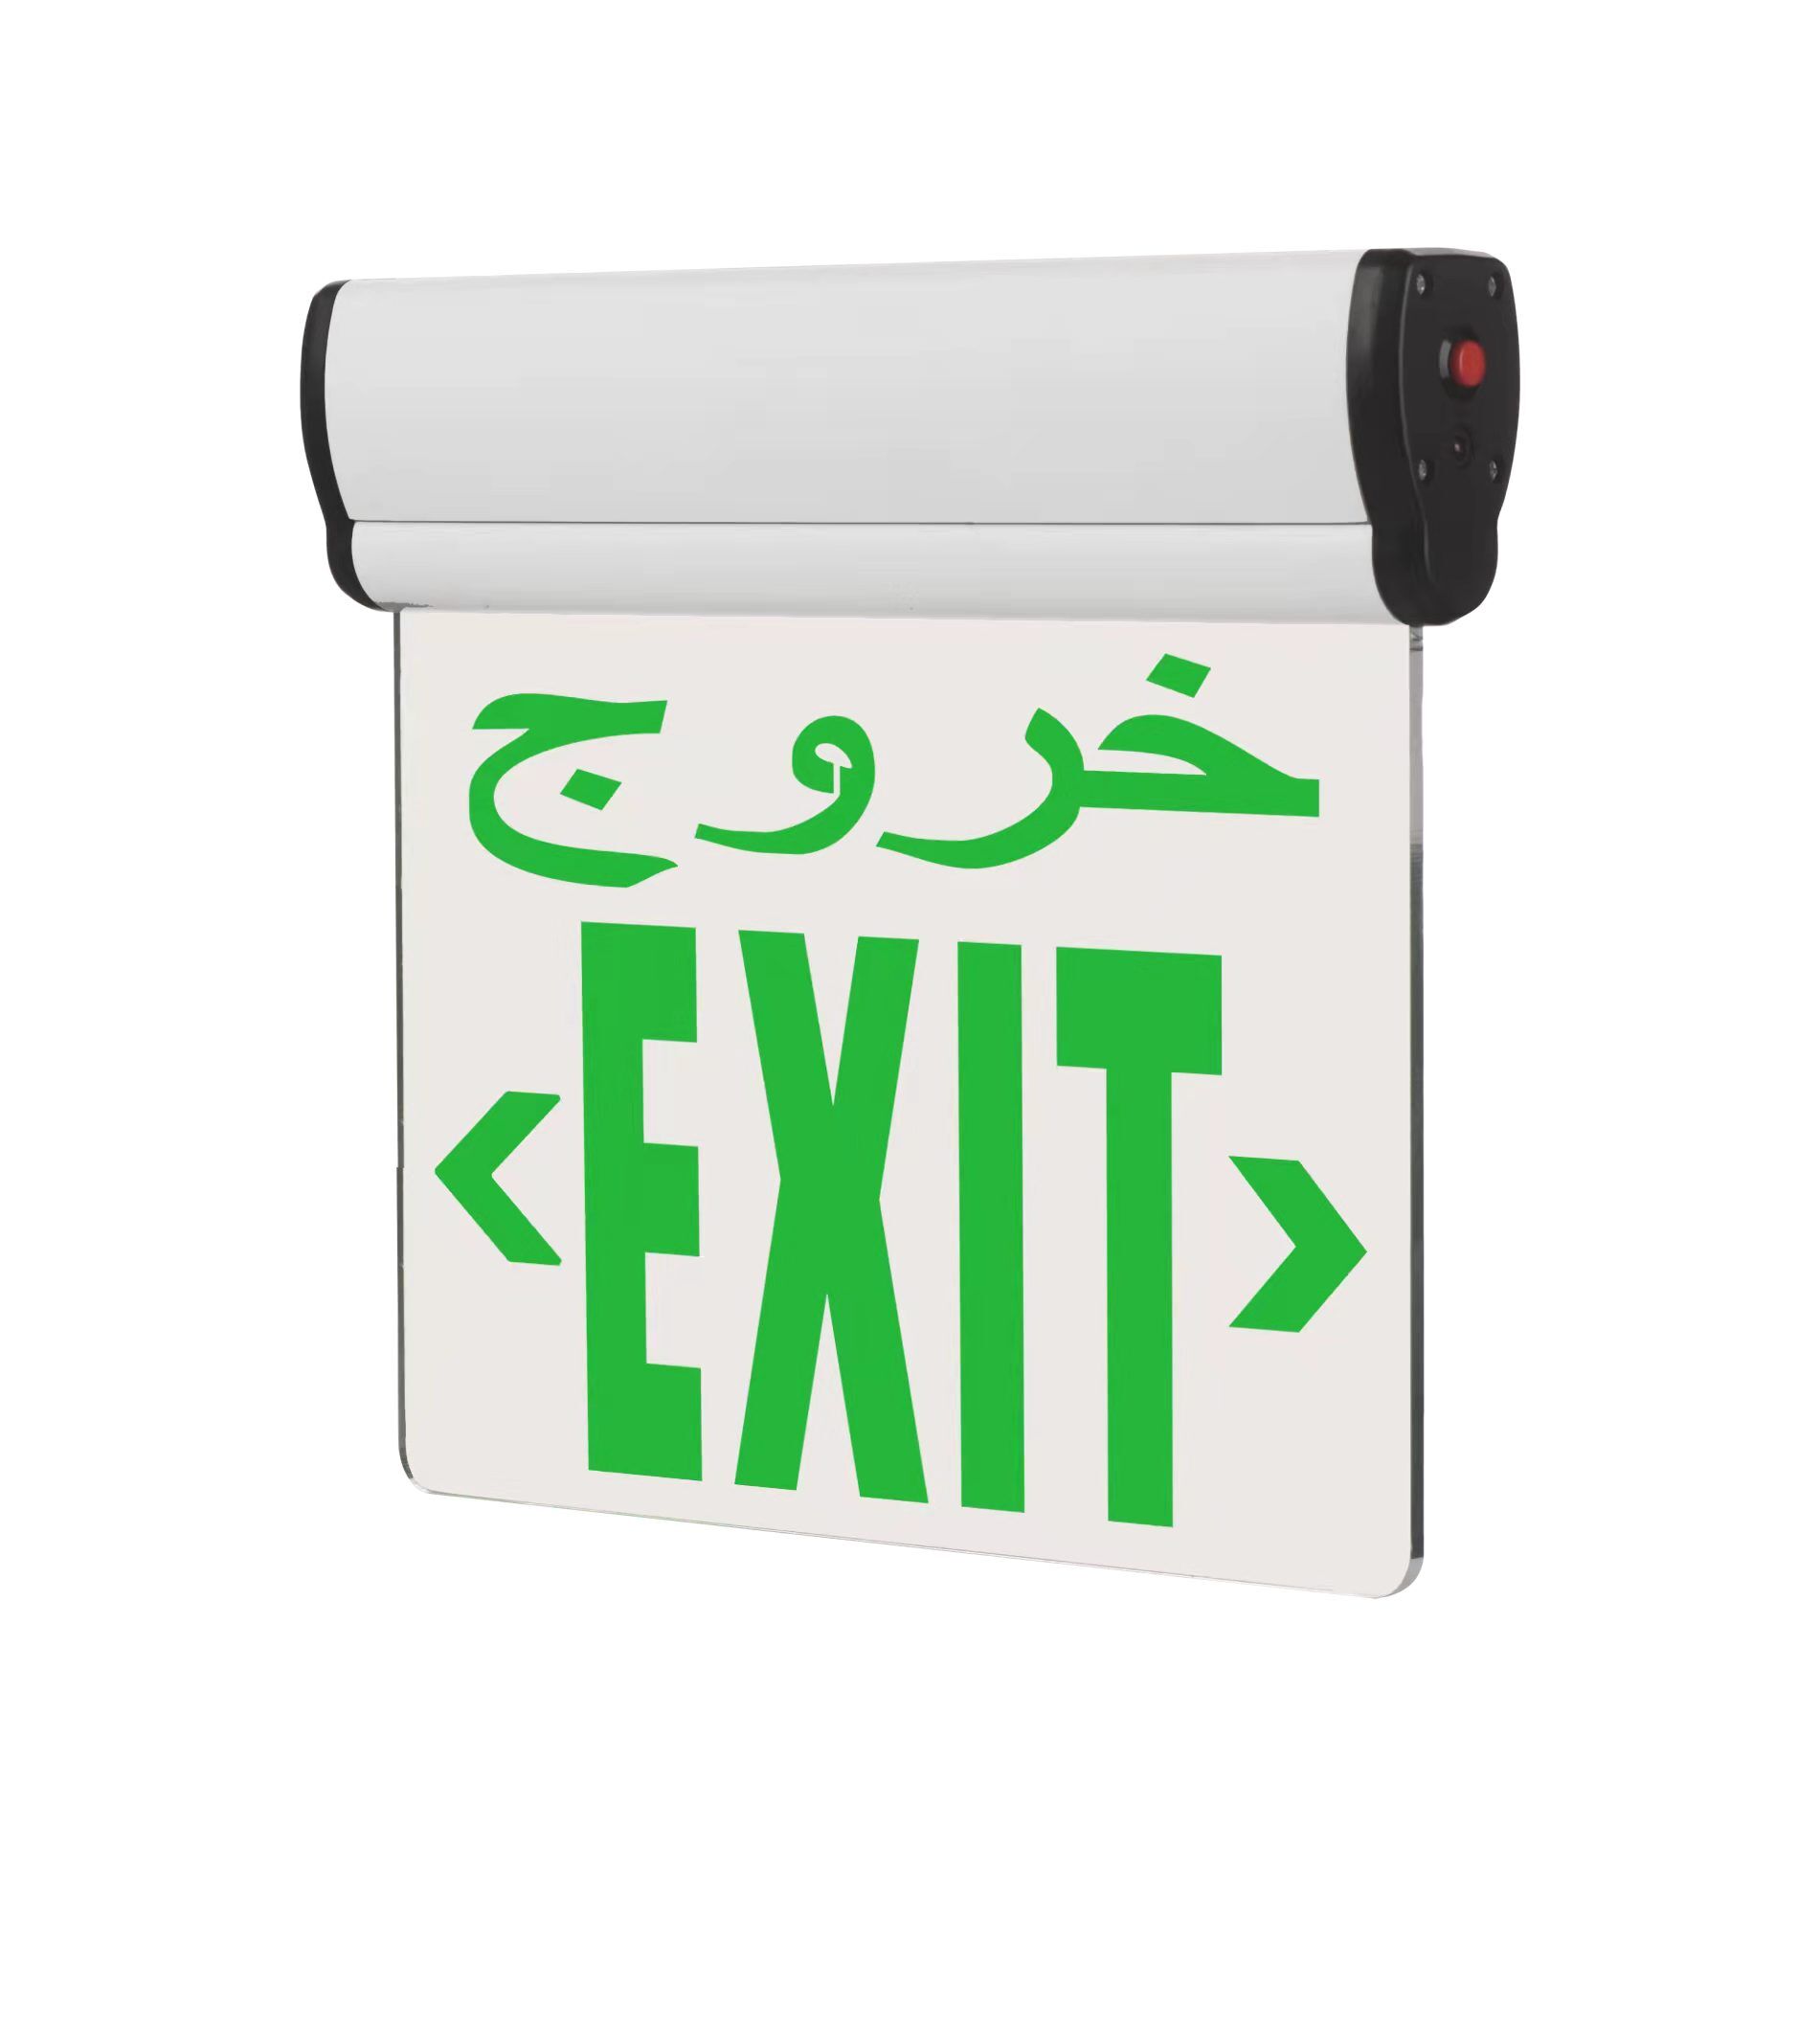 New LED Exit Sign For The Middle East Market